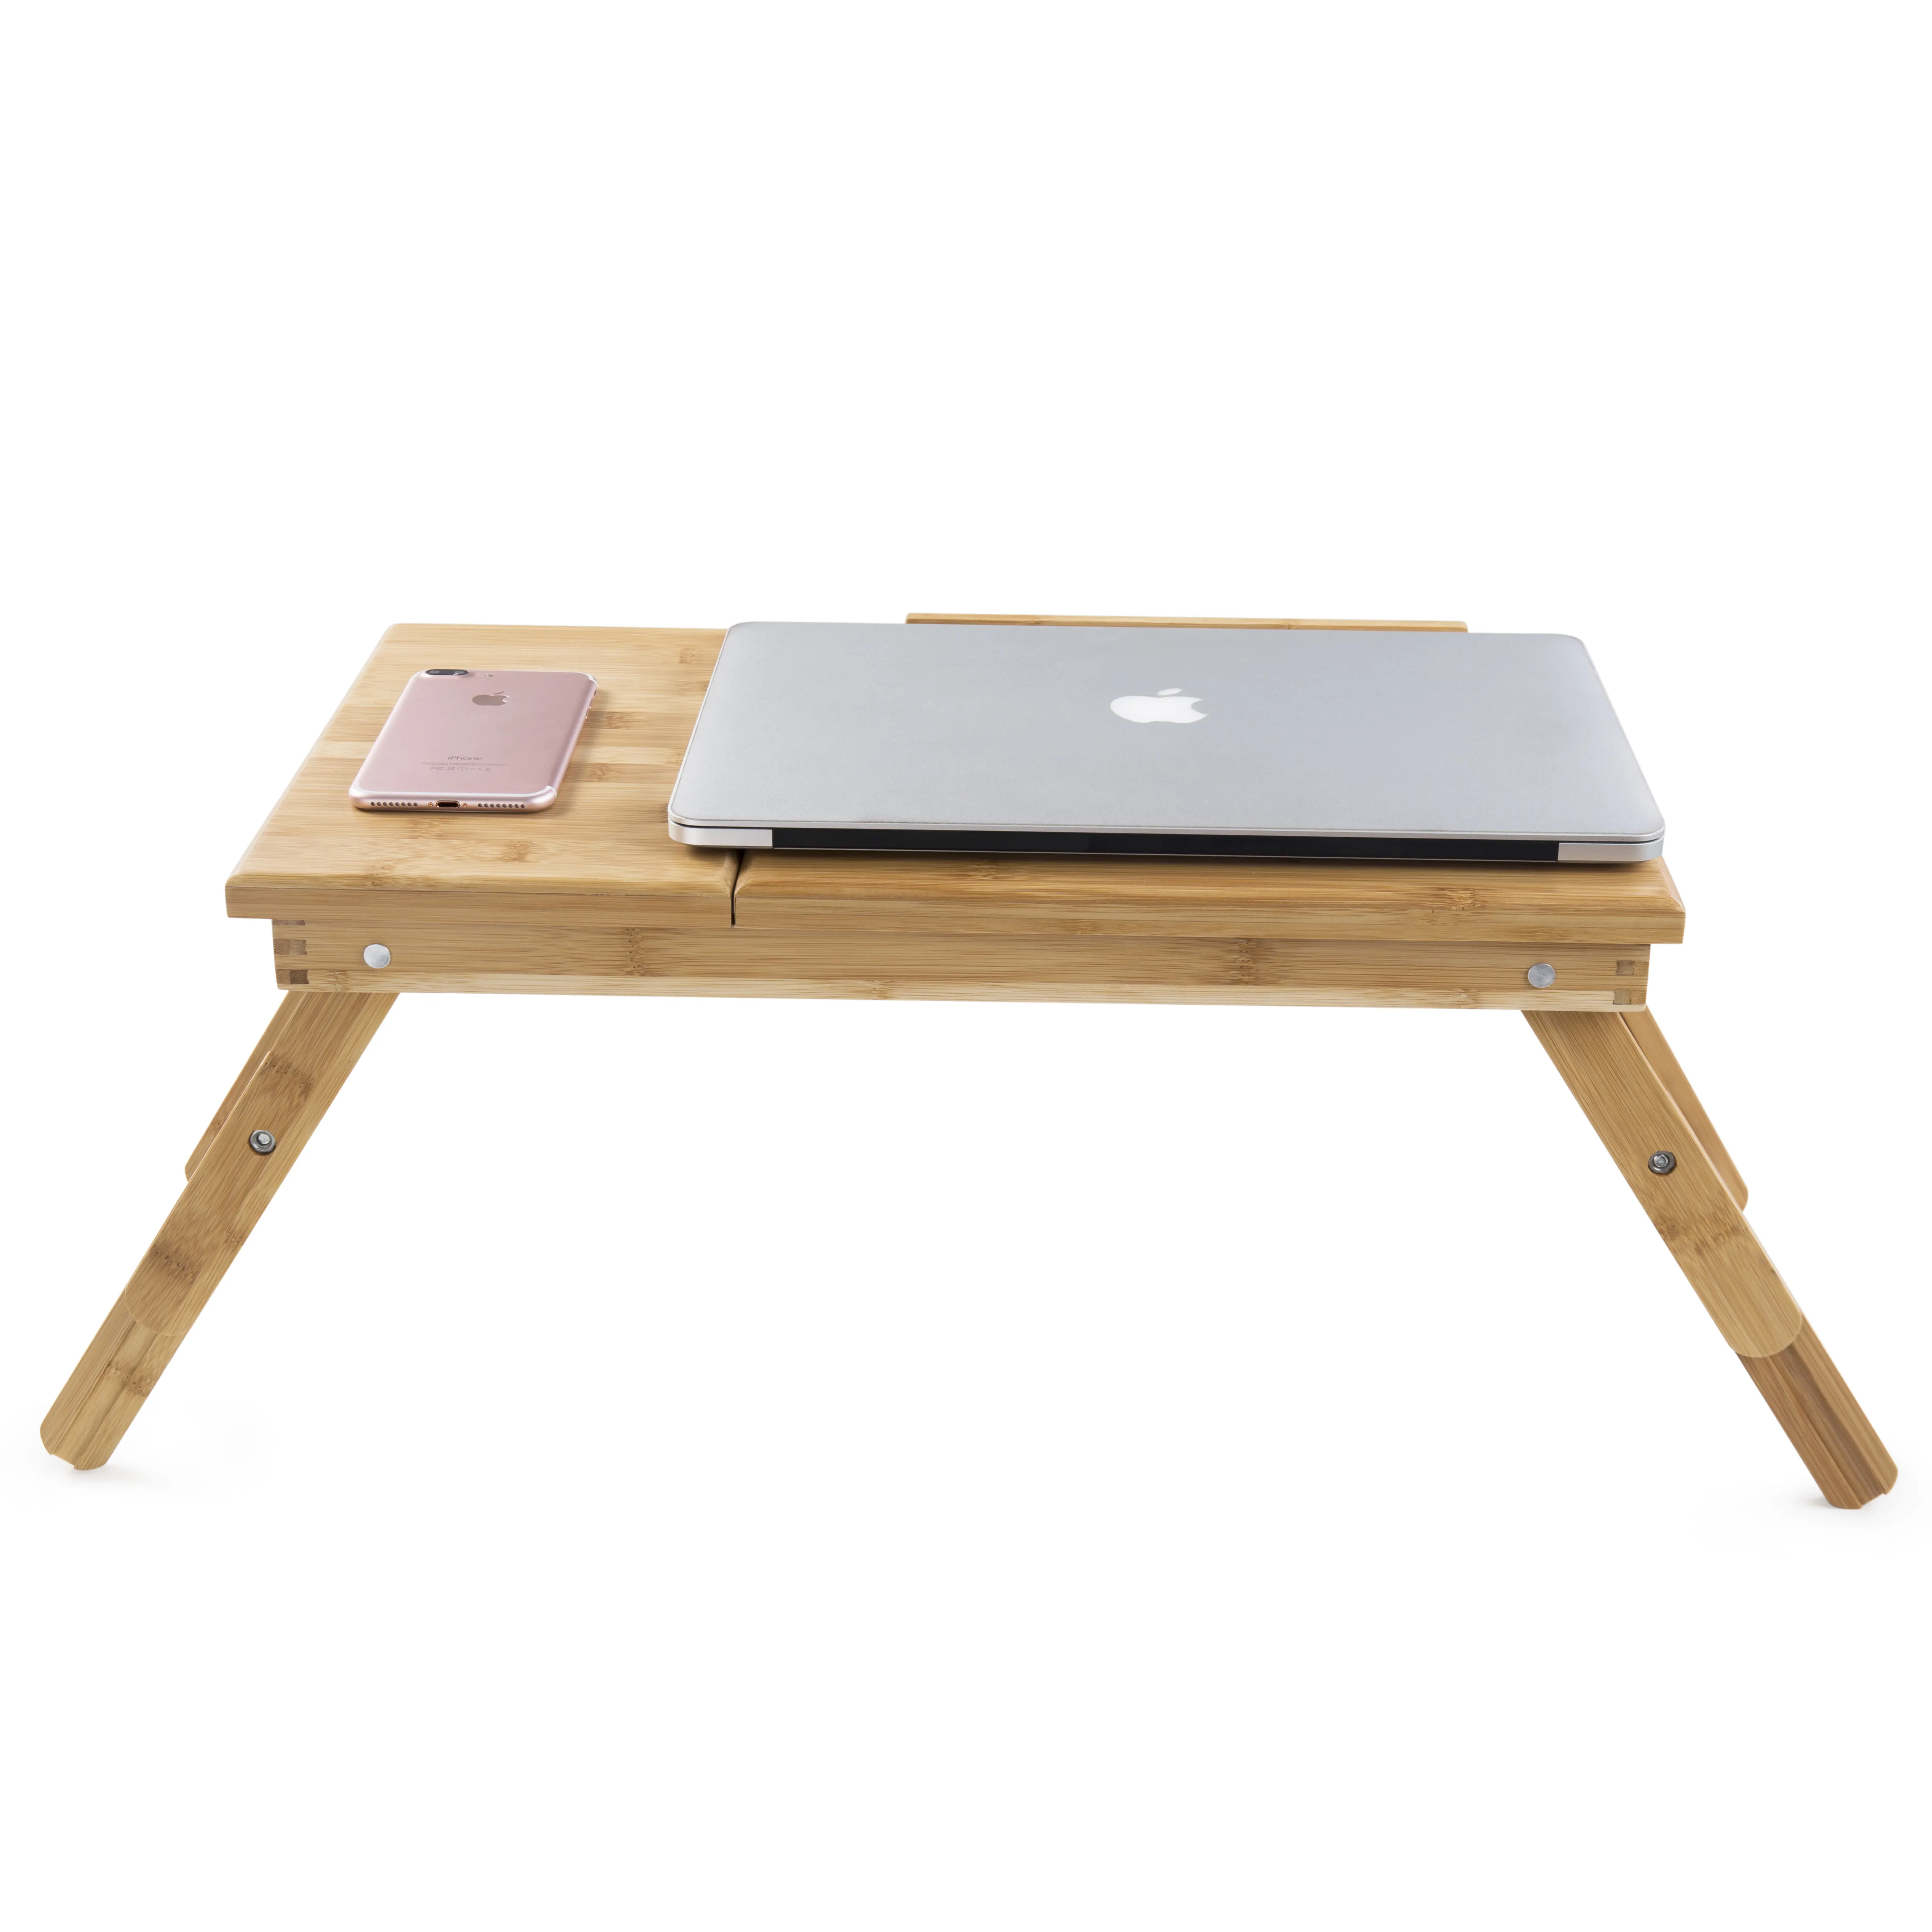 YCZM folding bamboo small square table portable computer desk on bed